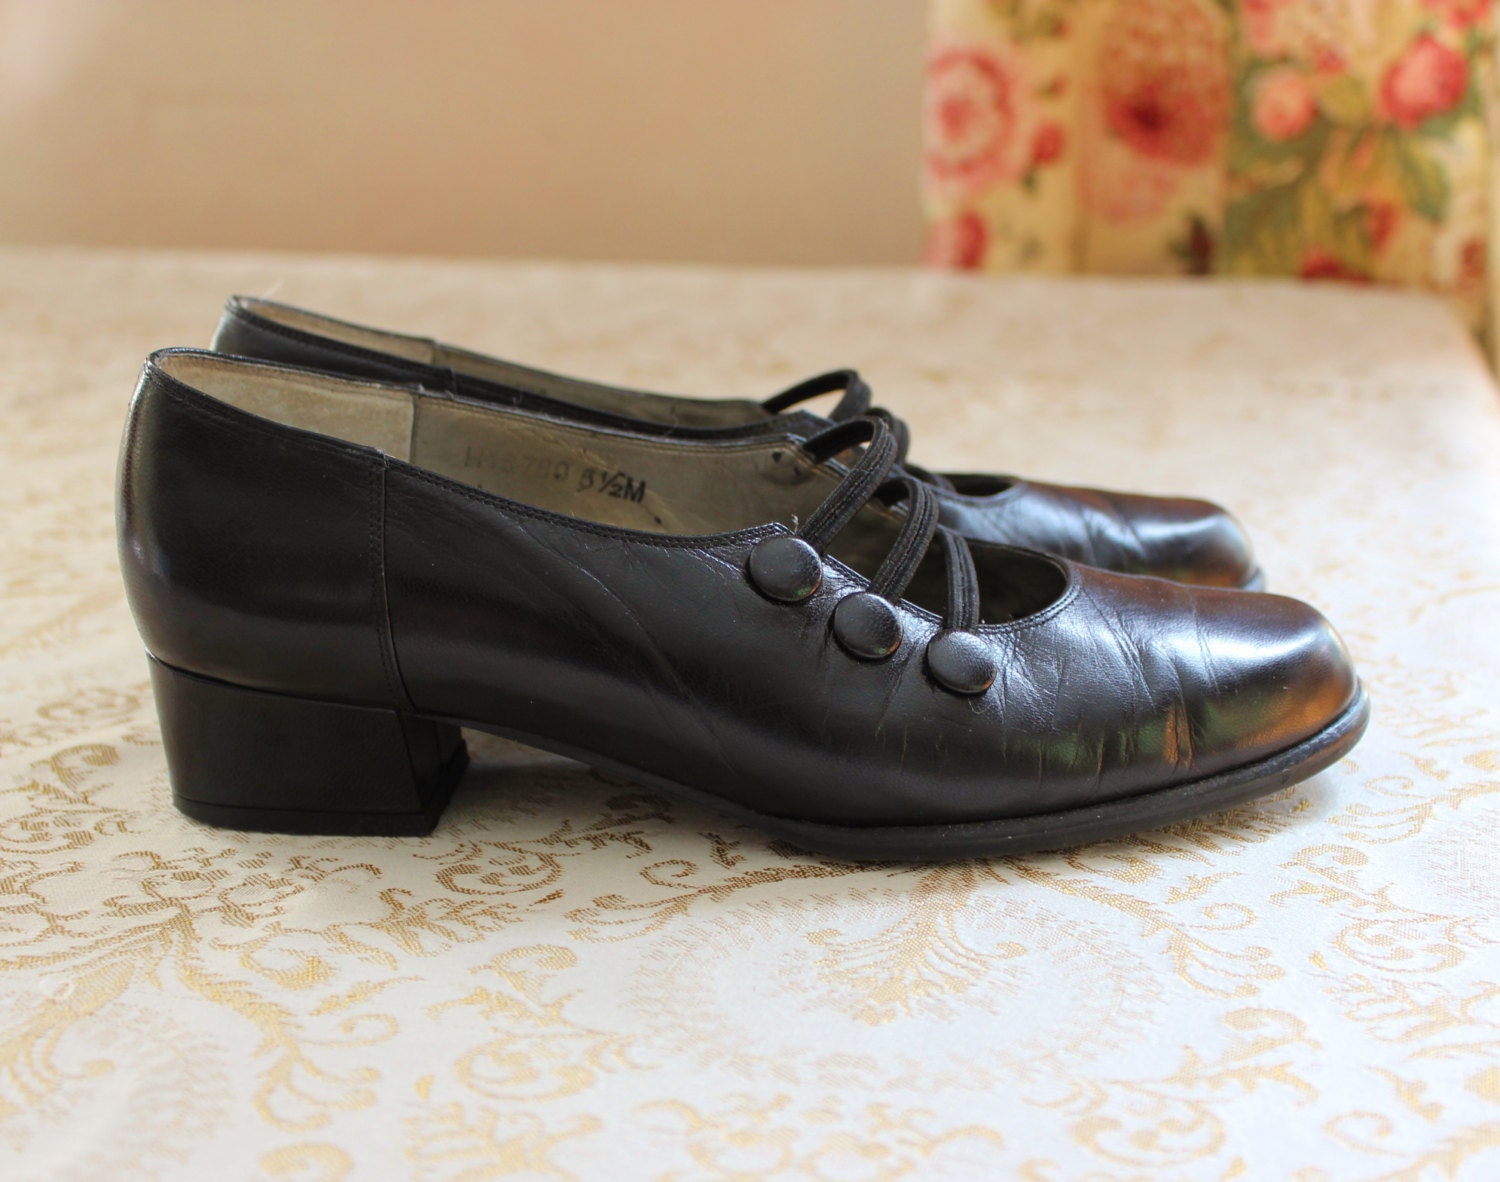 Black Leather Mary Jane Women's Shoes Vintage by BellaVitaVintage